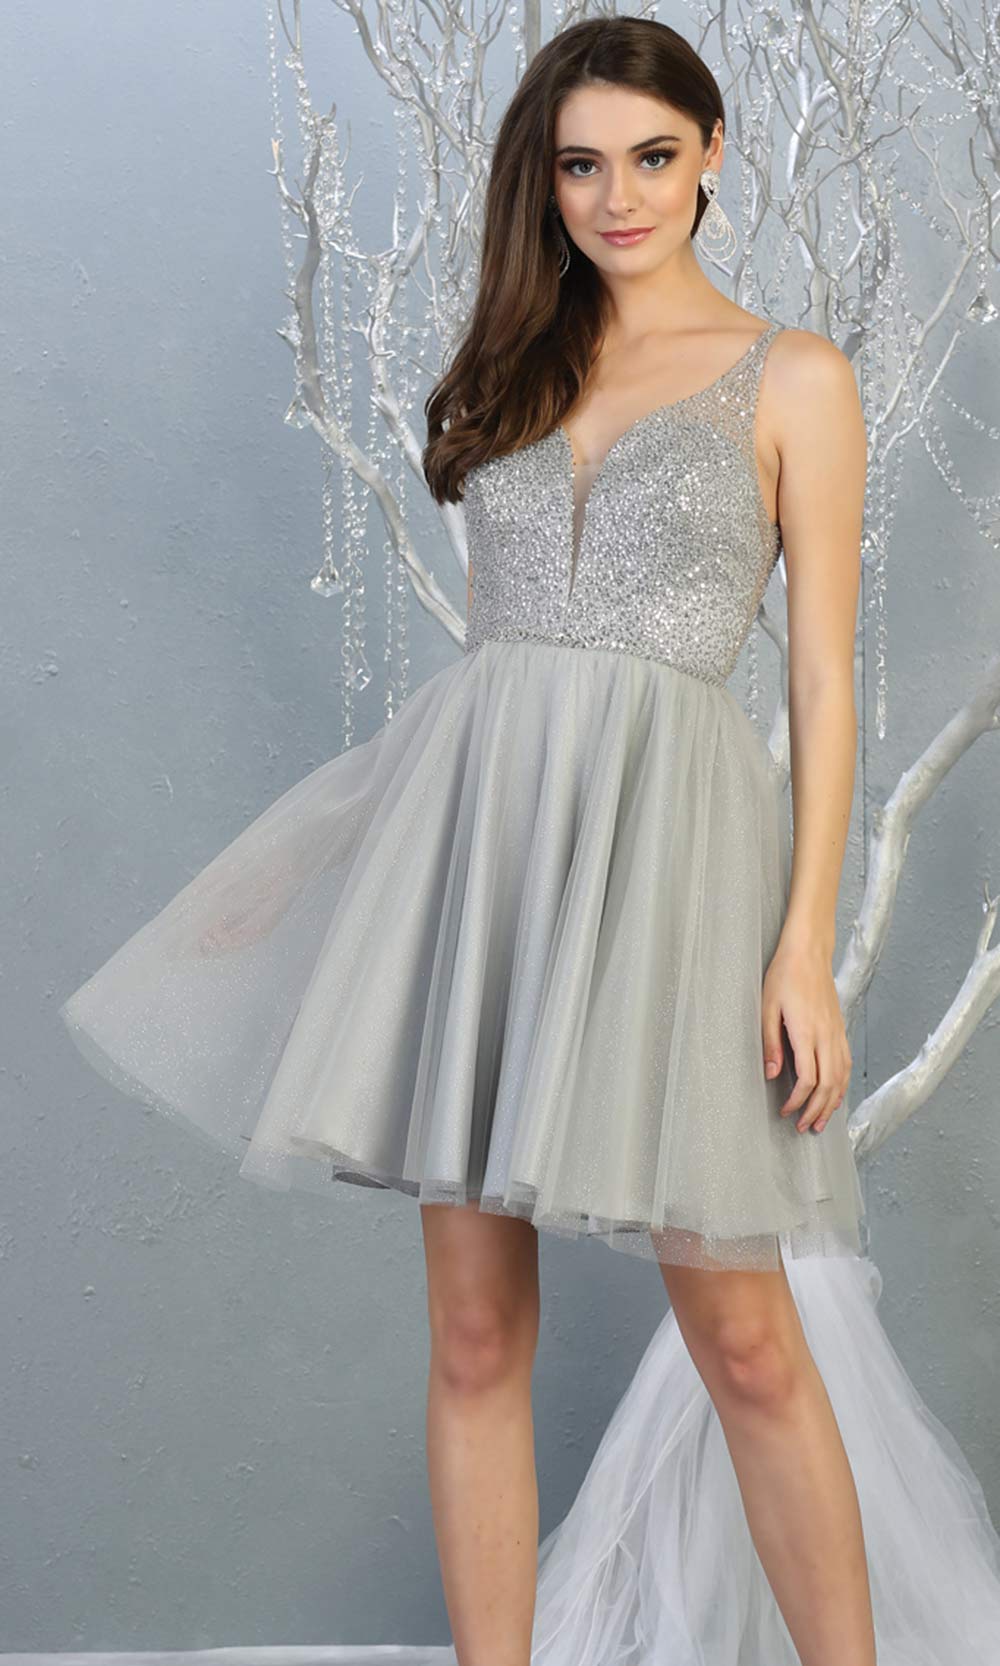 Mayqueen MQ1797 short silver grey sequin flowy vneck grade 8 graduation dress w/ straps & puffy skirt. Light gray party dress is perfect for prom, graduation, grade 8 grad, confirmation dress, bat mitzvah dress, damas. Plus sizes avail for grad dress.jpggrade 8 grad dresses, graduation dresses